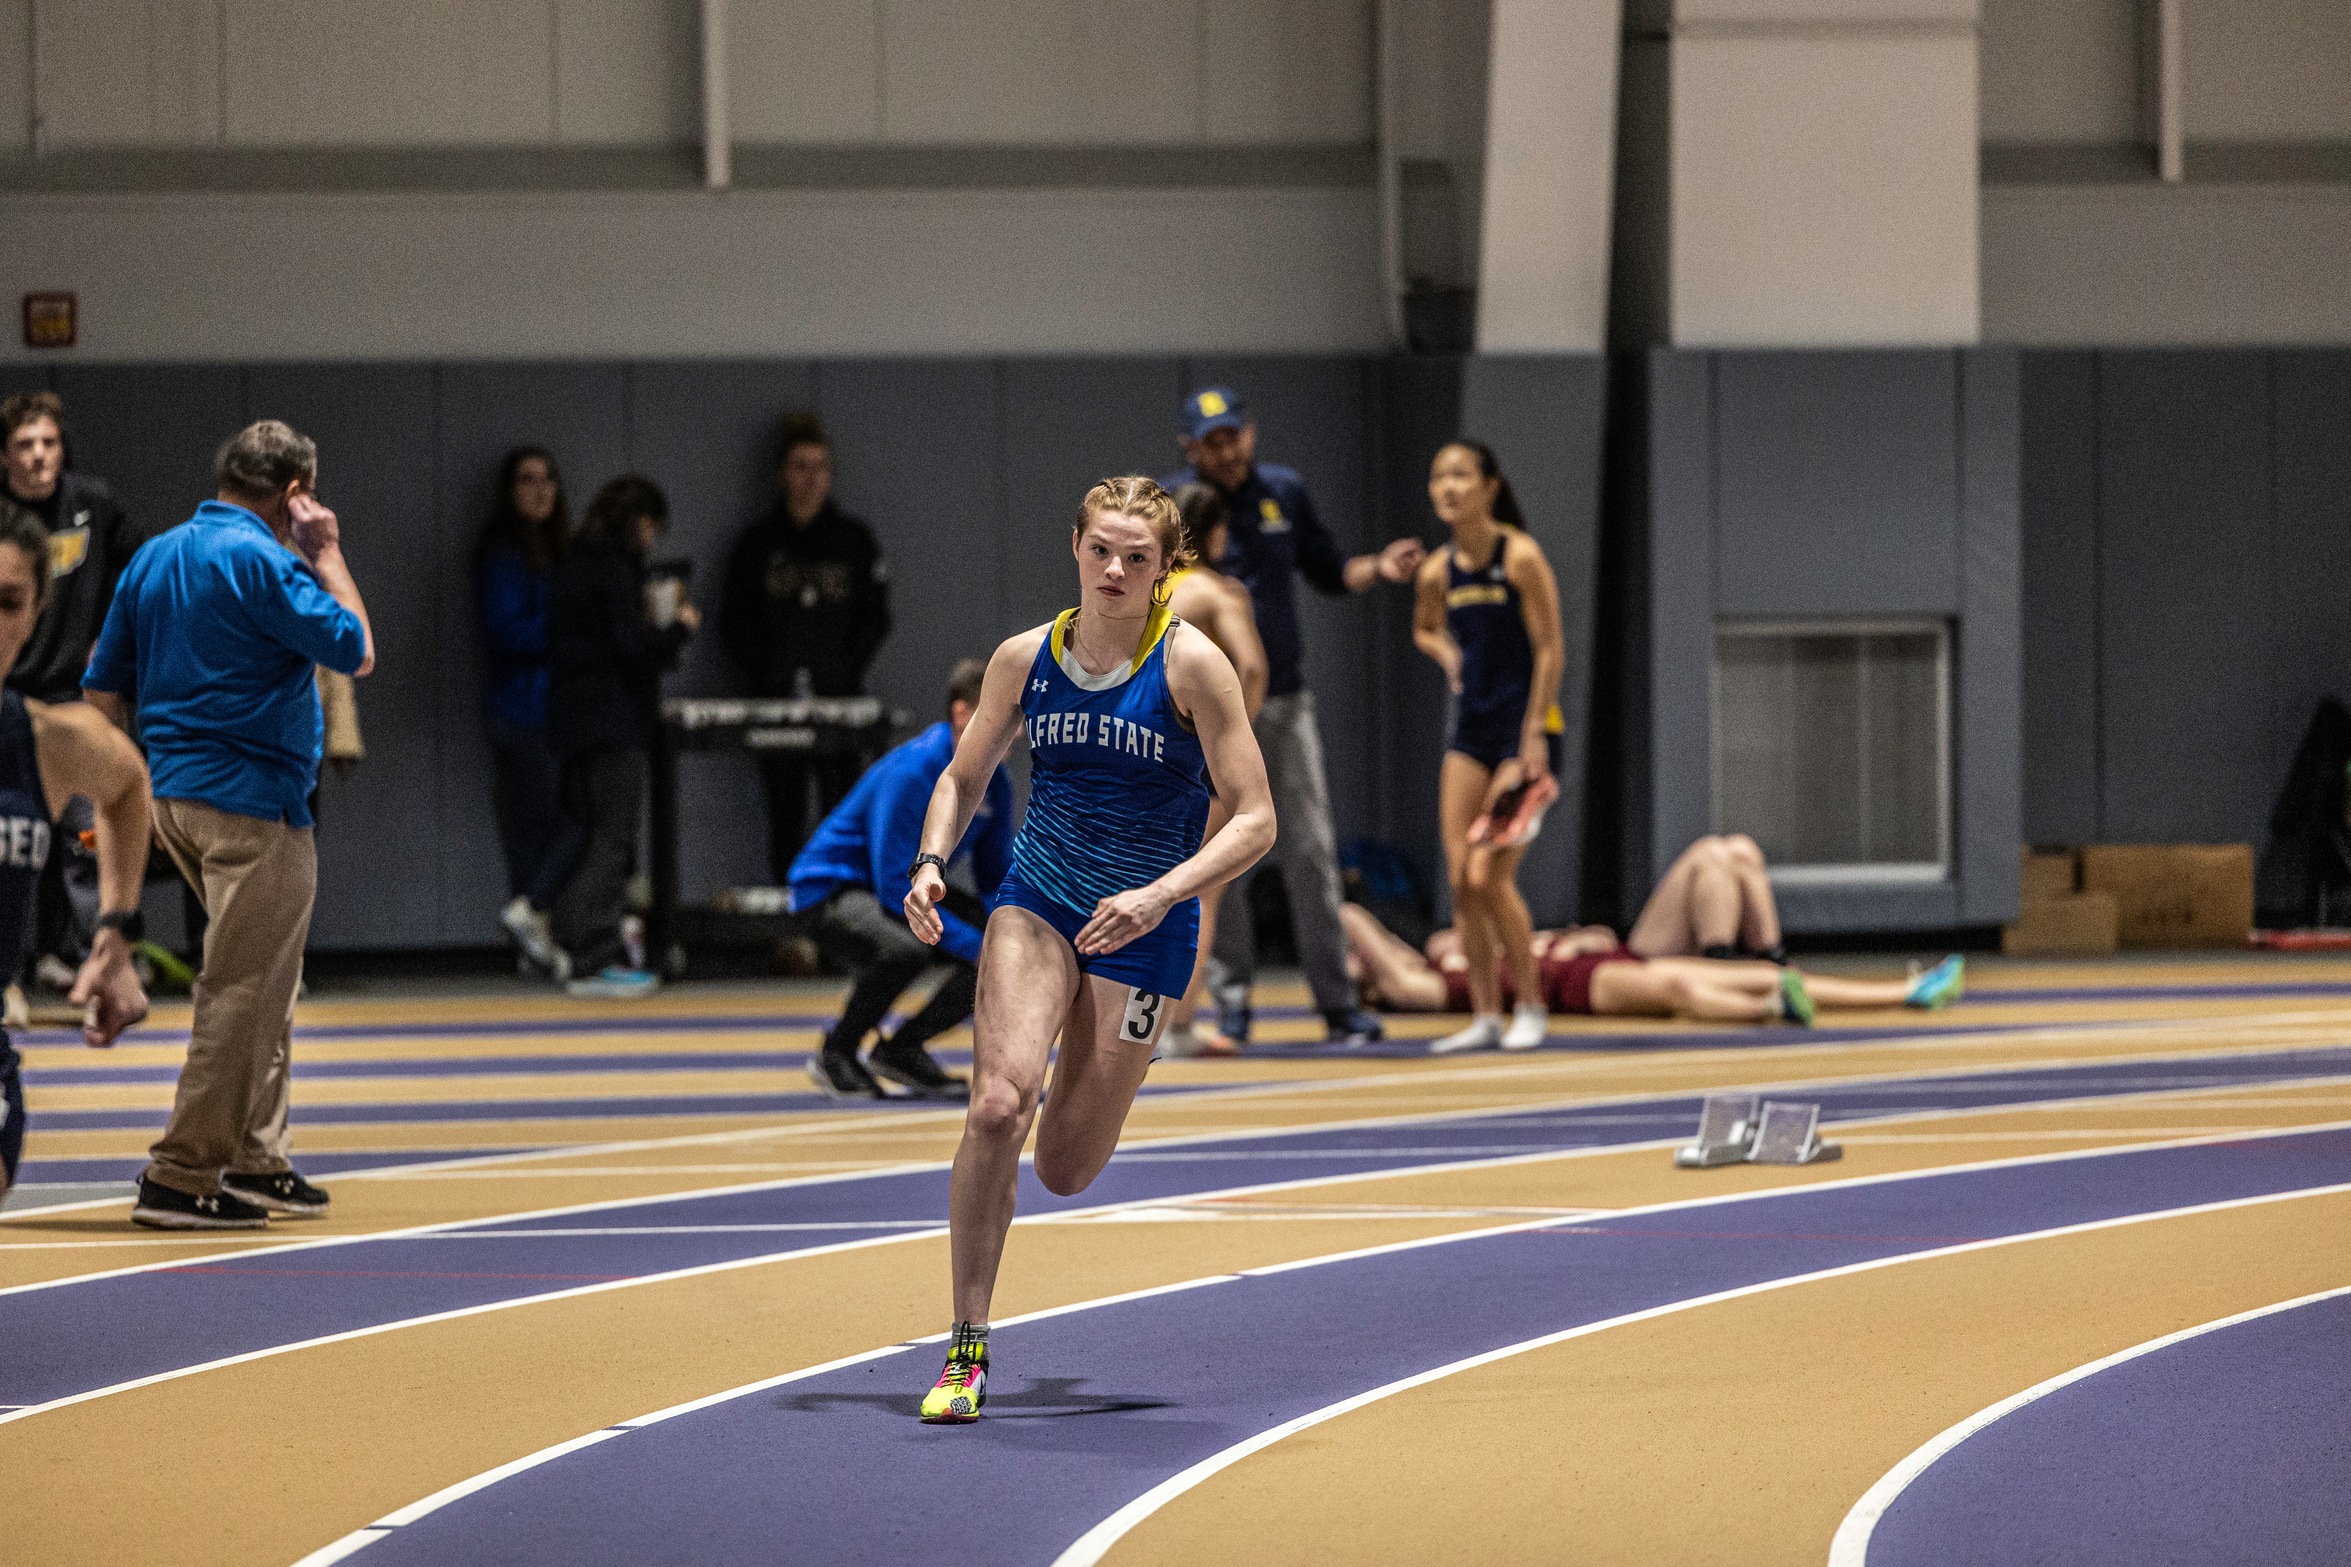 Pioneers Tallied Two Win At Naz Tune Up Meet